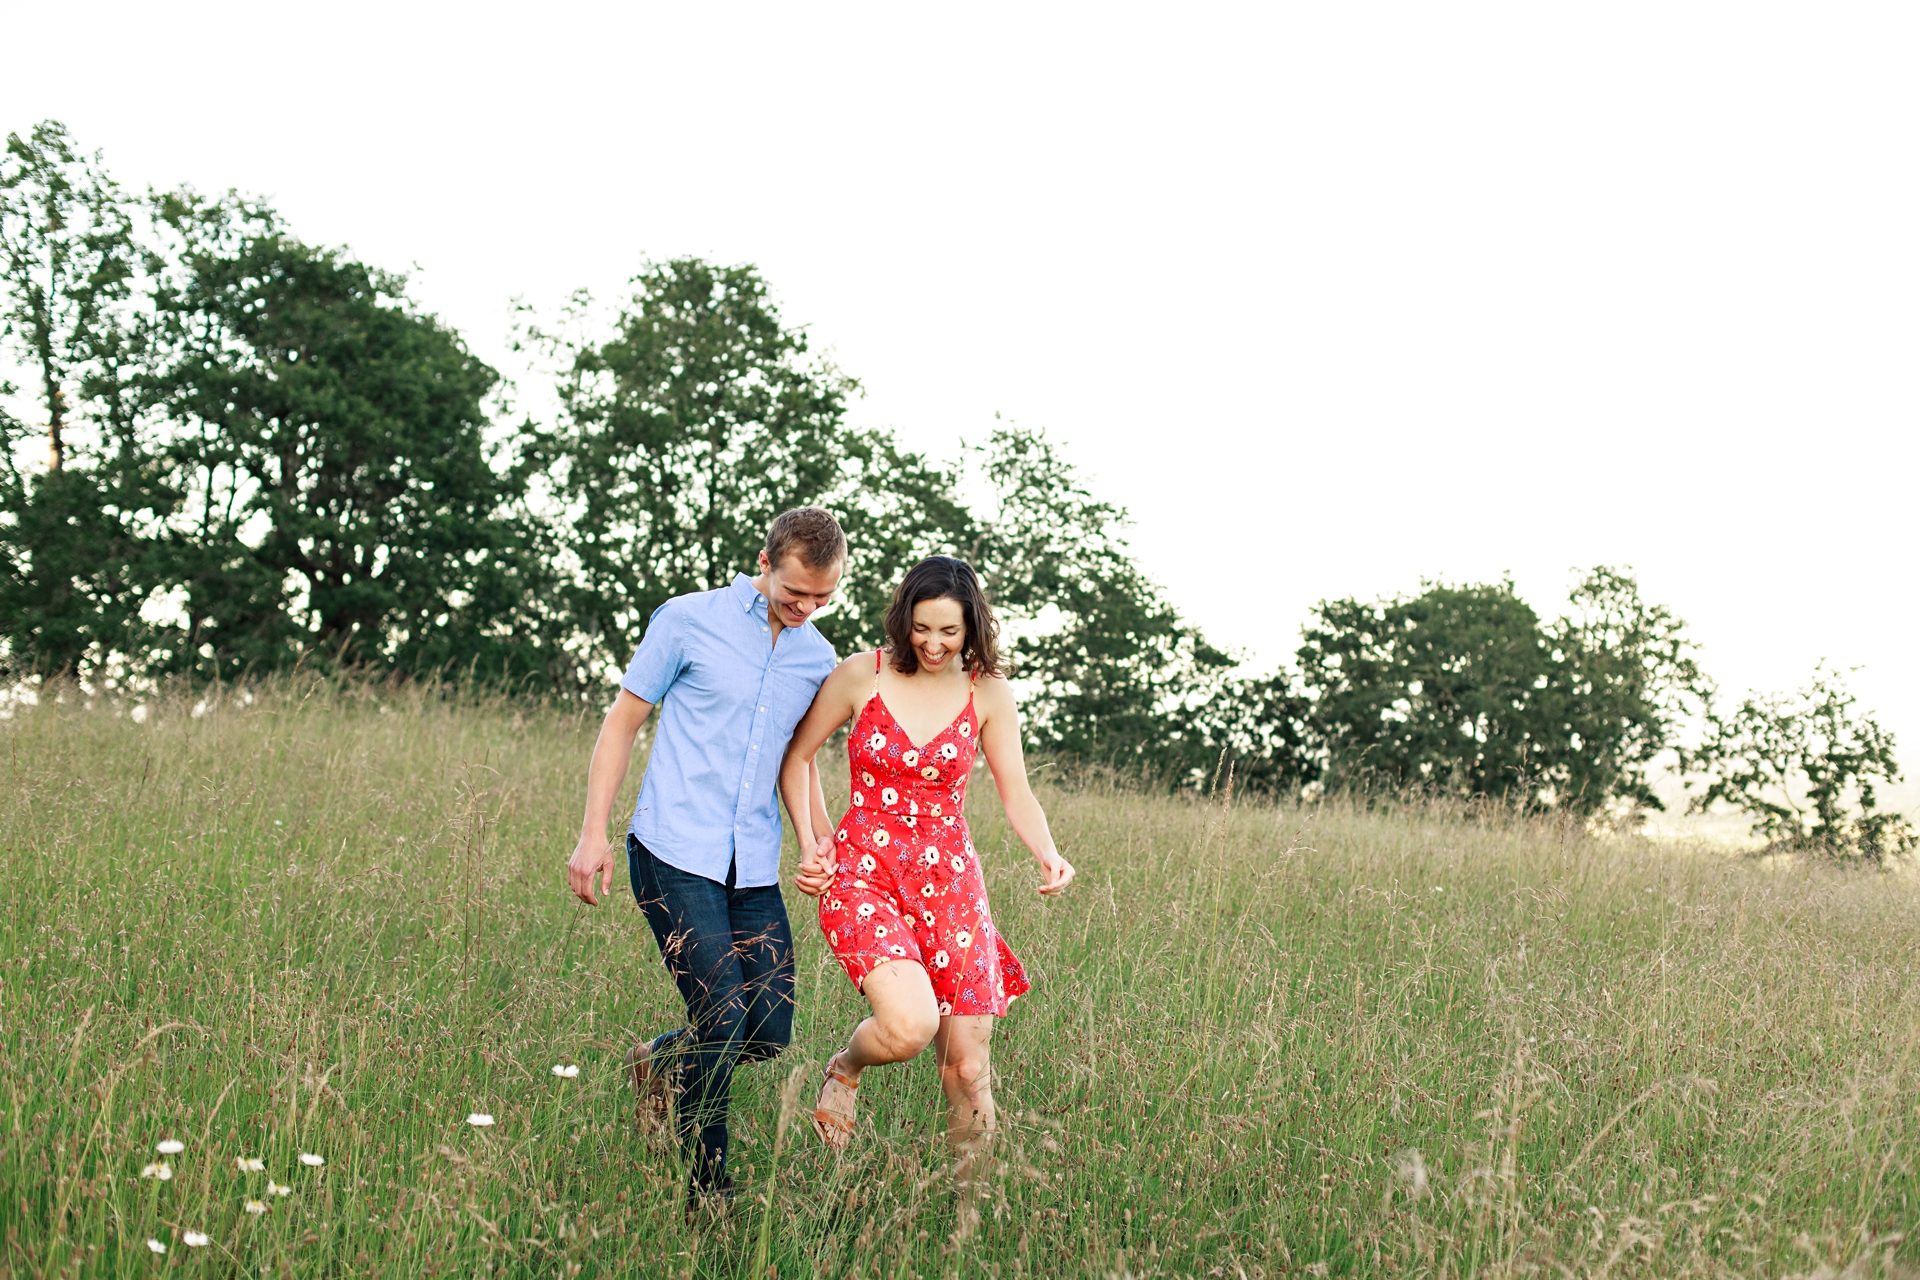 Engagement portrait session in a field in corvallis oregon by Alison Smith